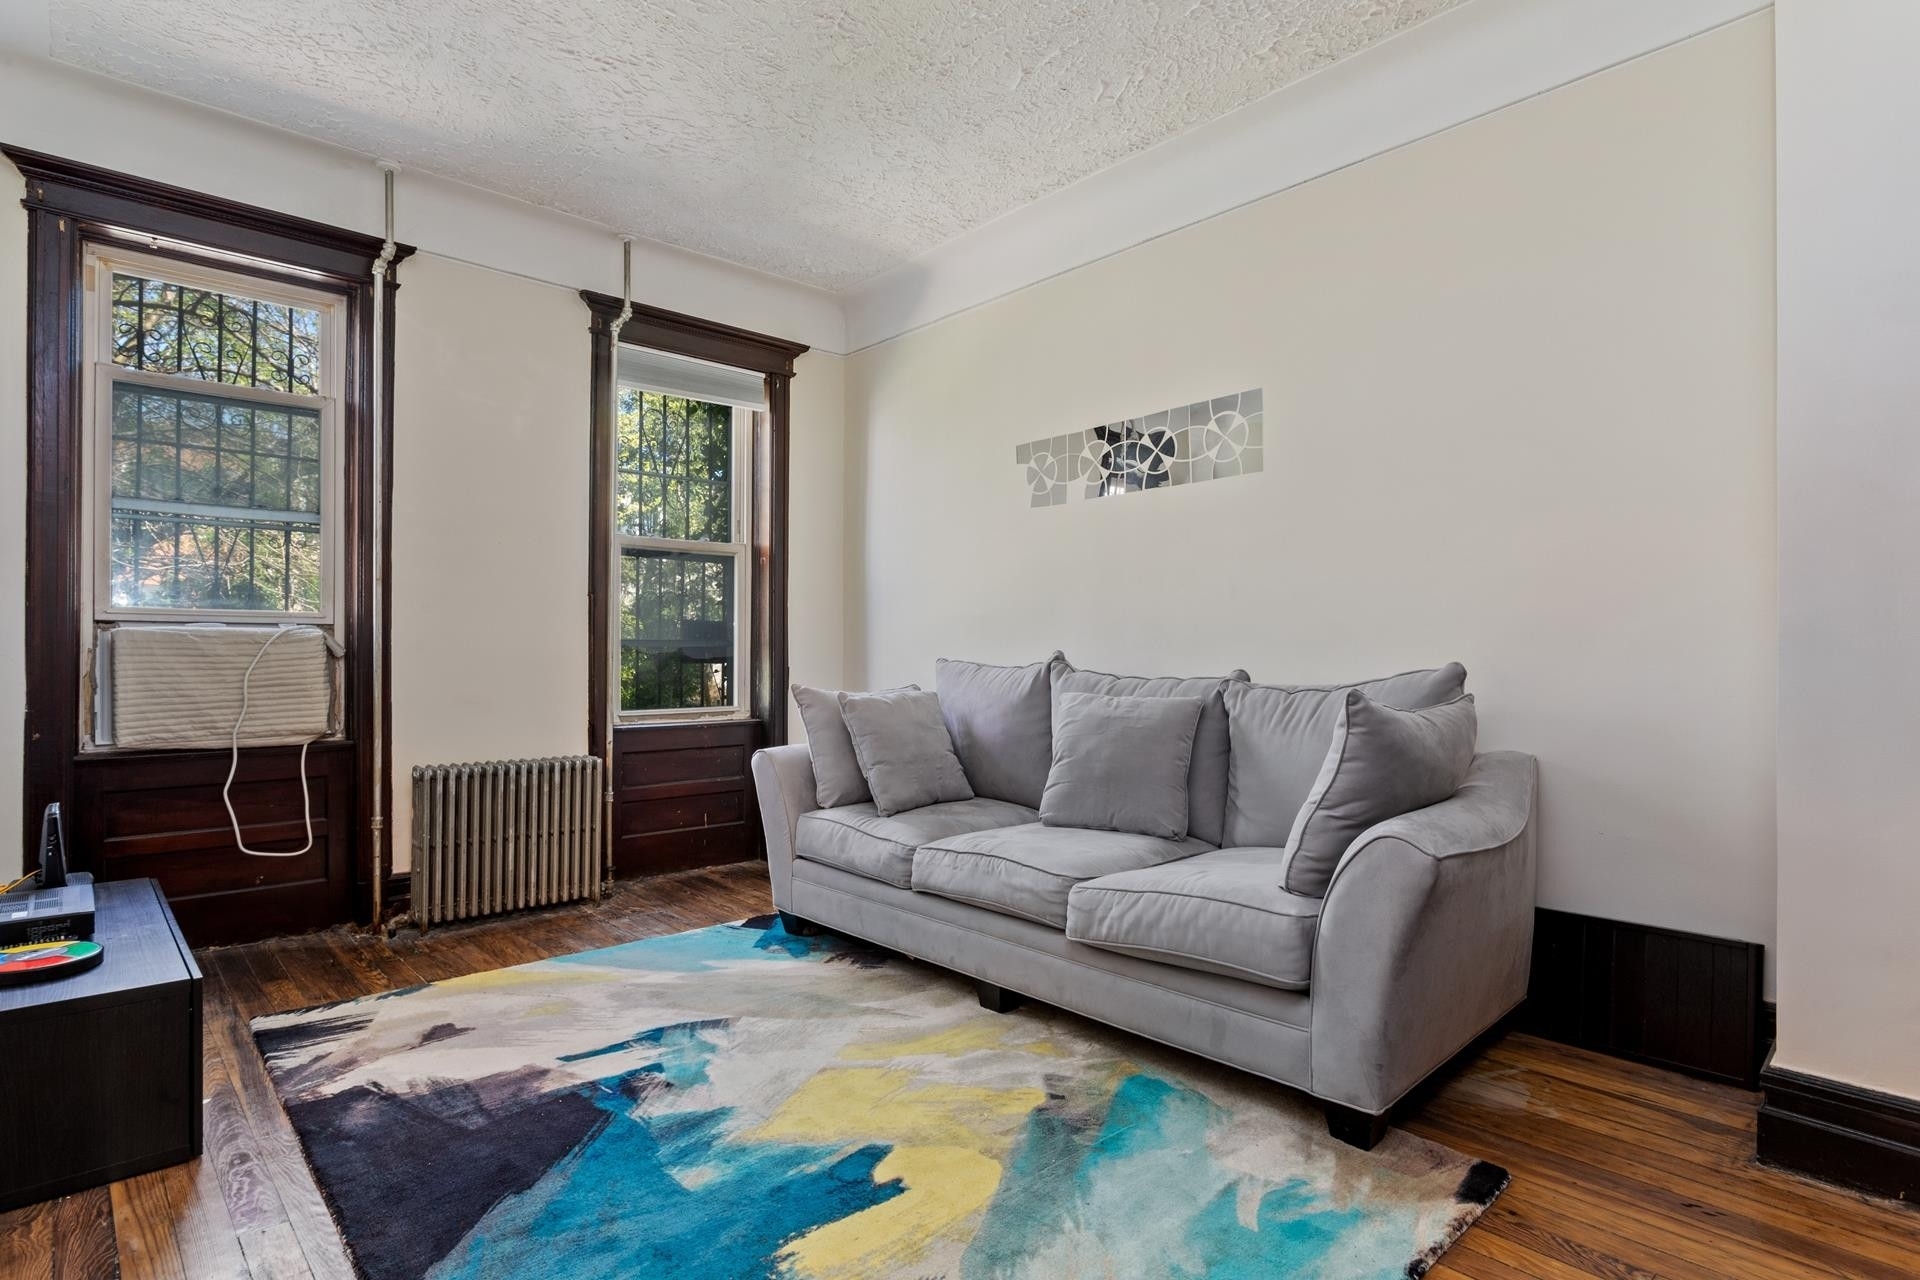 2. Rentals at 241 East 32nd St, 2 Brooklyn